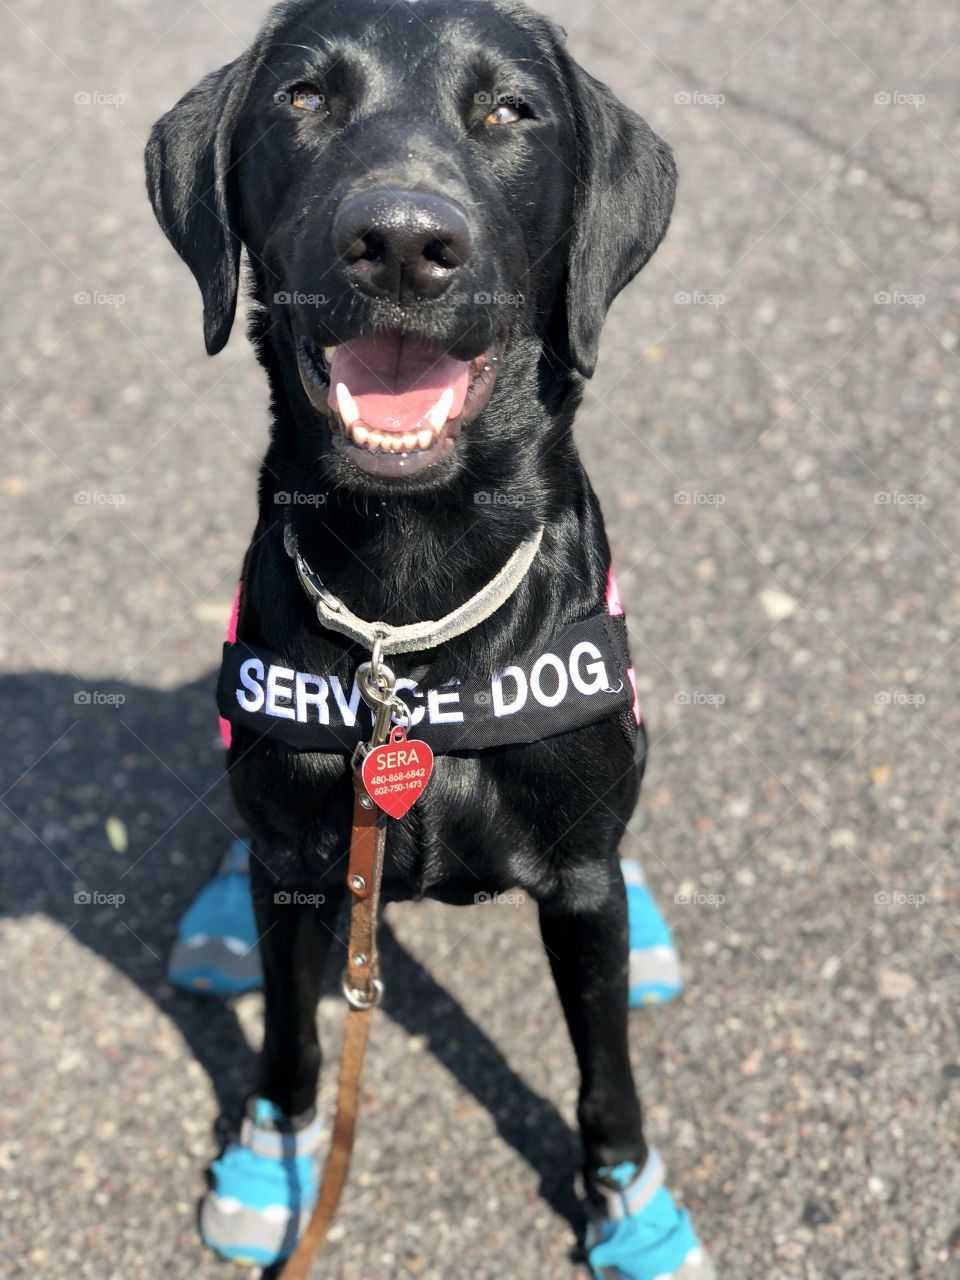 Henderson’s Sweet Serendipity CGC CGCA “Sera” - Sera, a 1.5 year old black Labrador Retriever, is a Service Dog in Training. She is wearing shoes or ‘booties’ to protect her paws from the hot asphalt here in Arizona. 